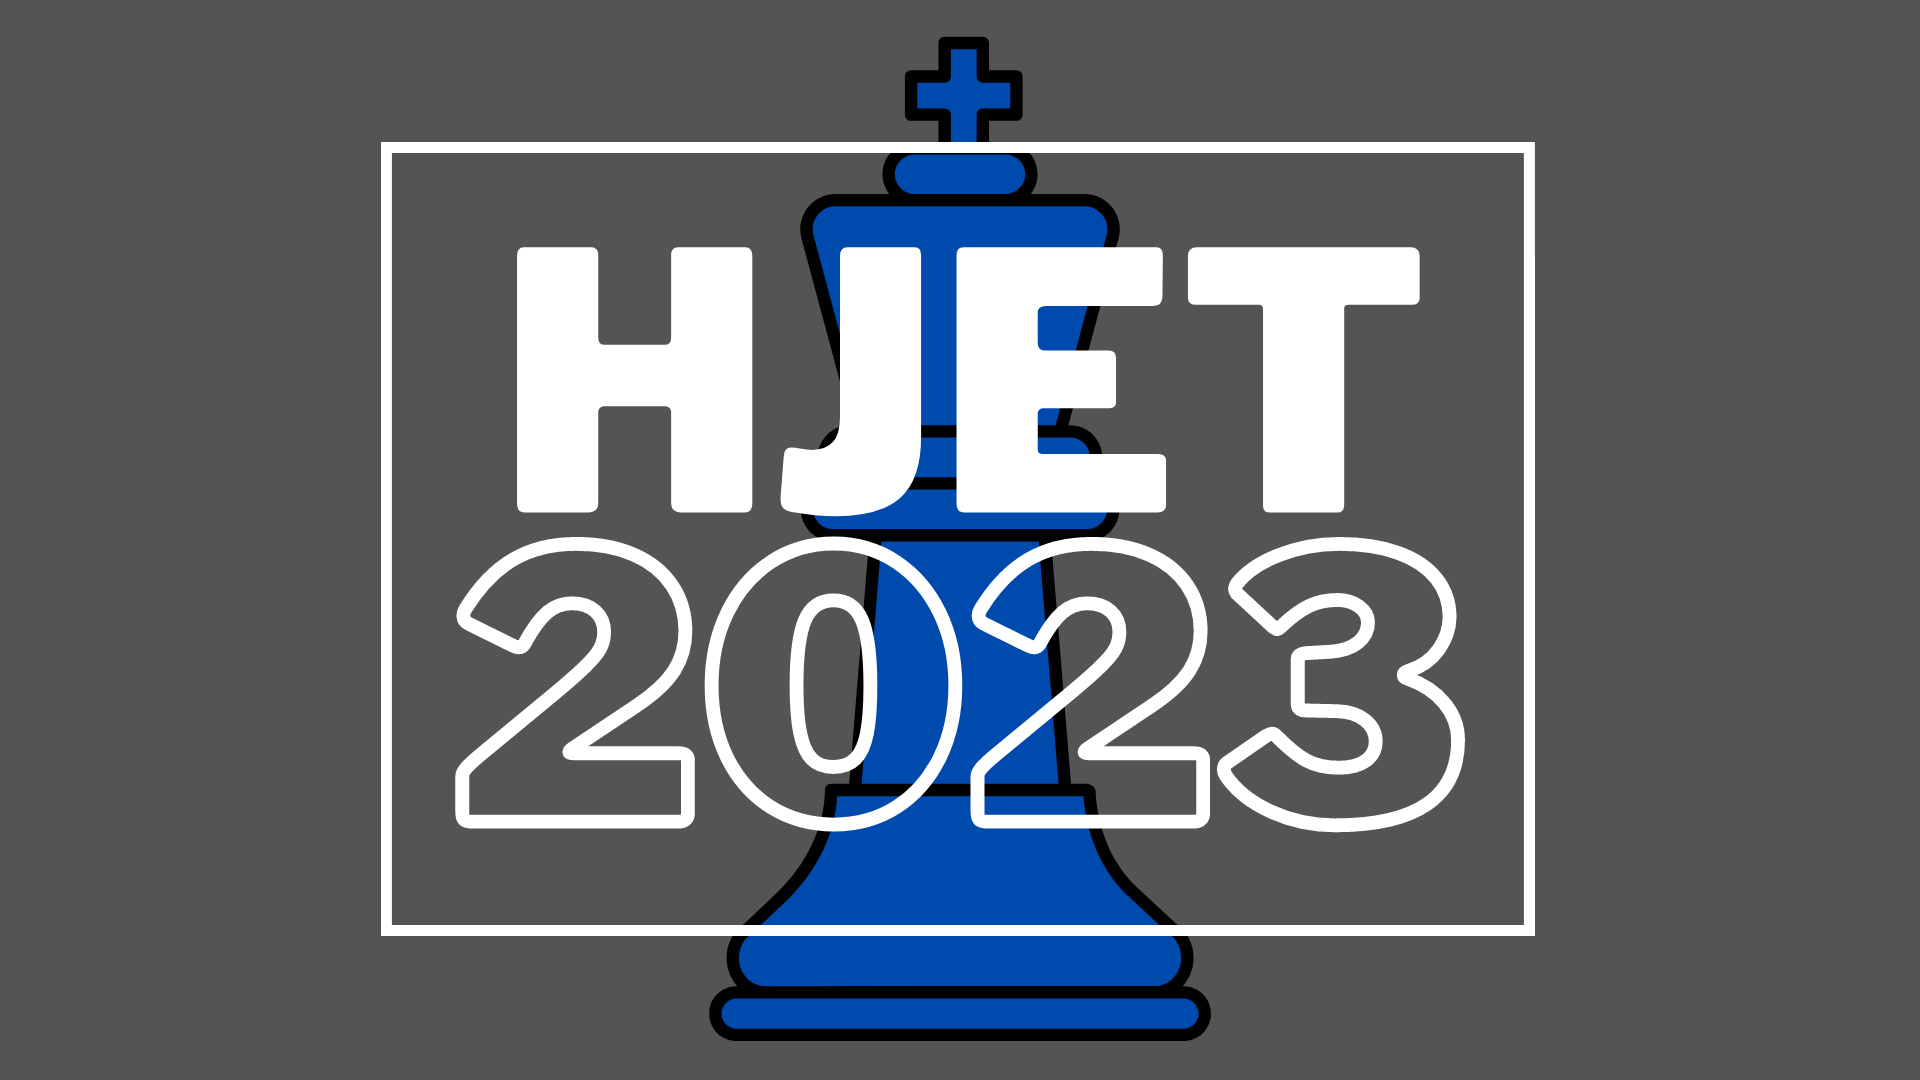 You are currently viewing HJET 2023 | Ausschreibung